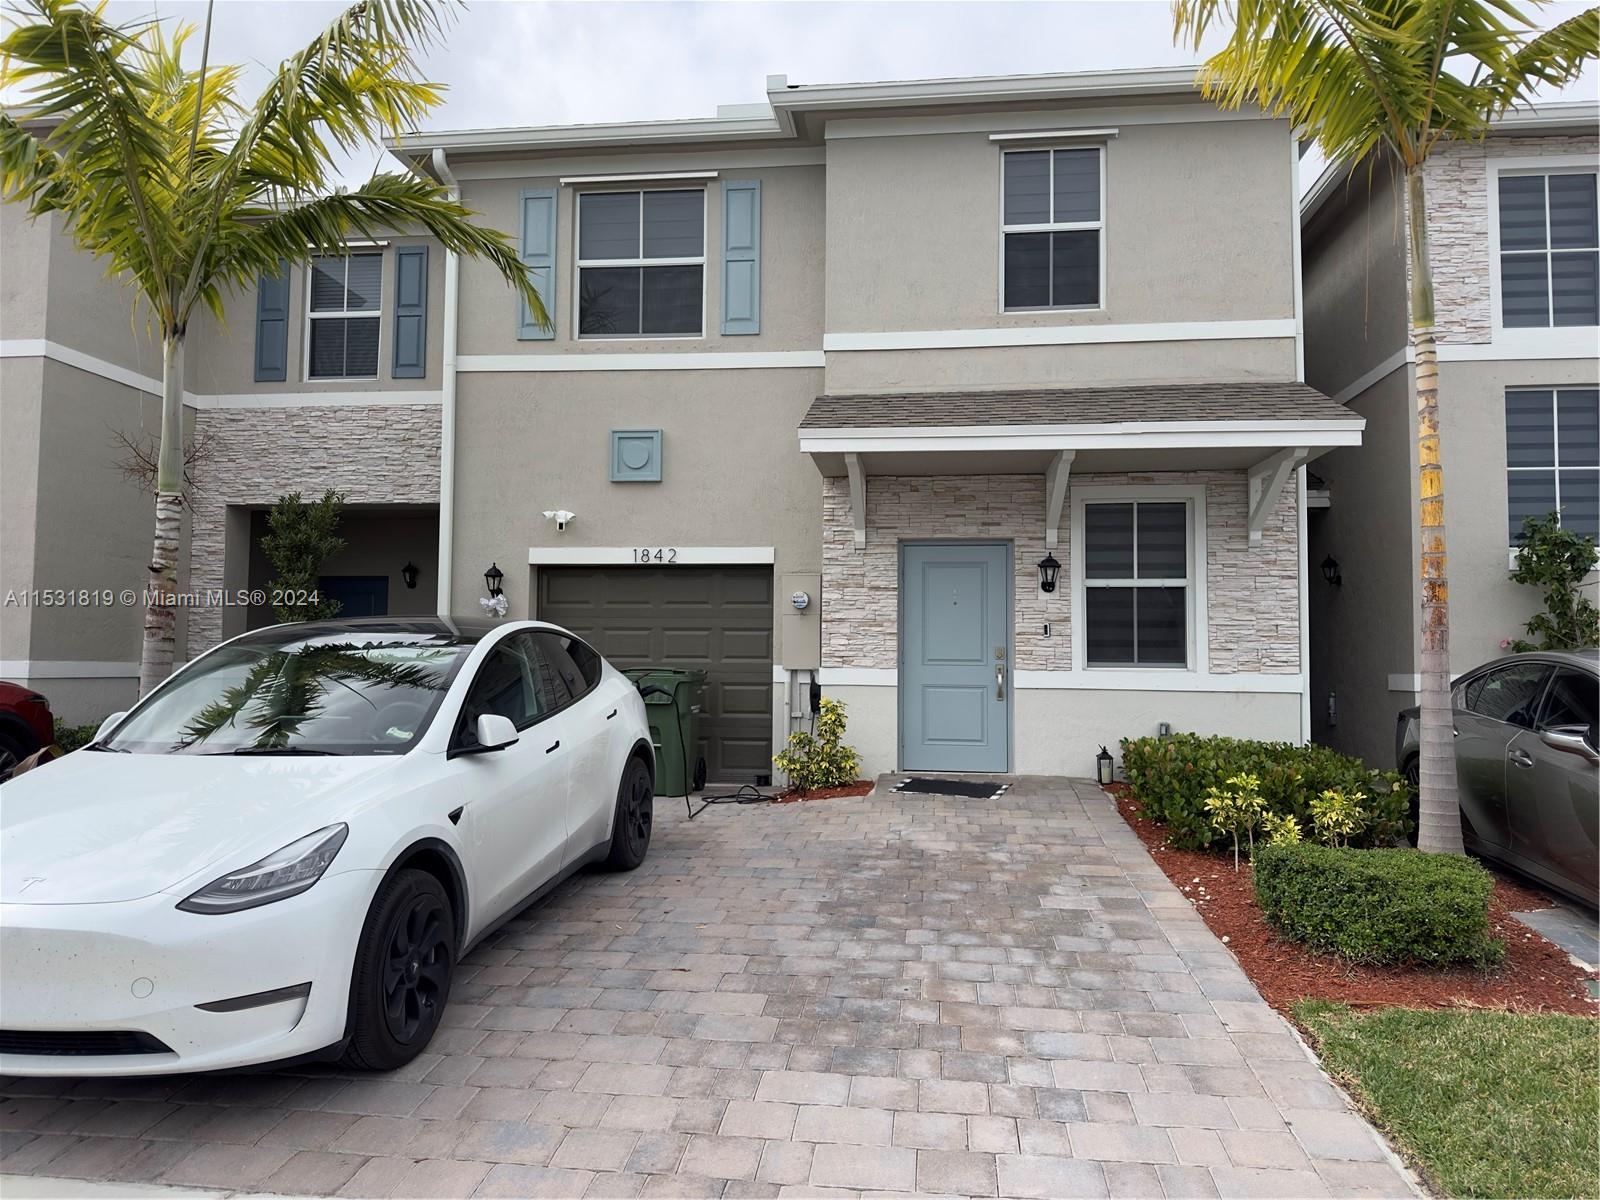 View Homestead, FL 33034 townhome